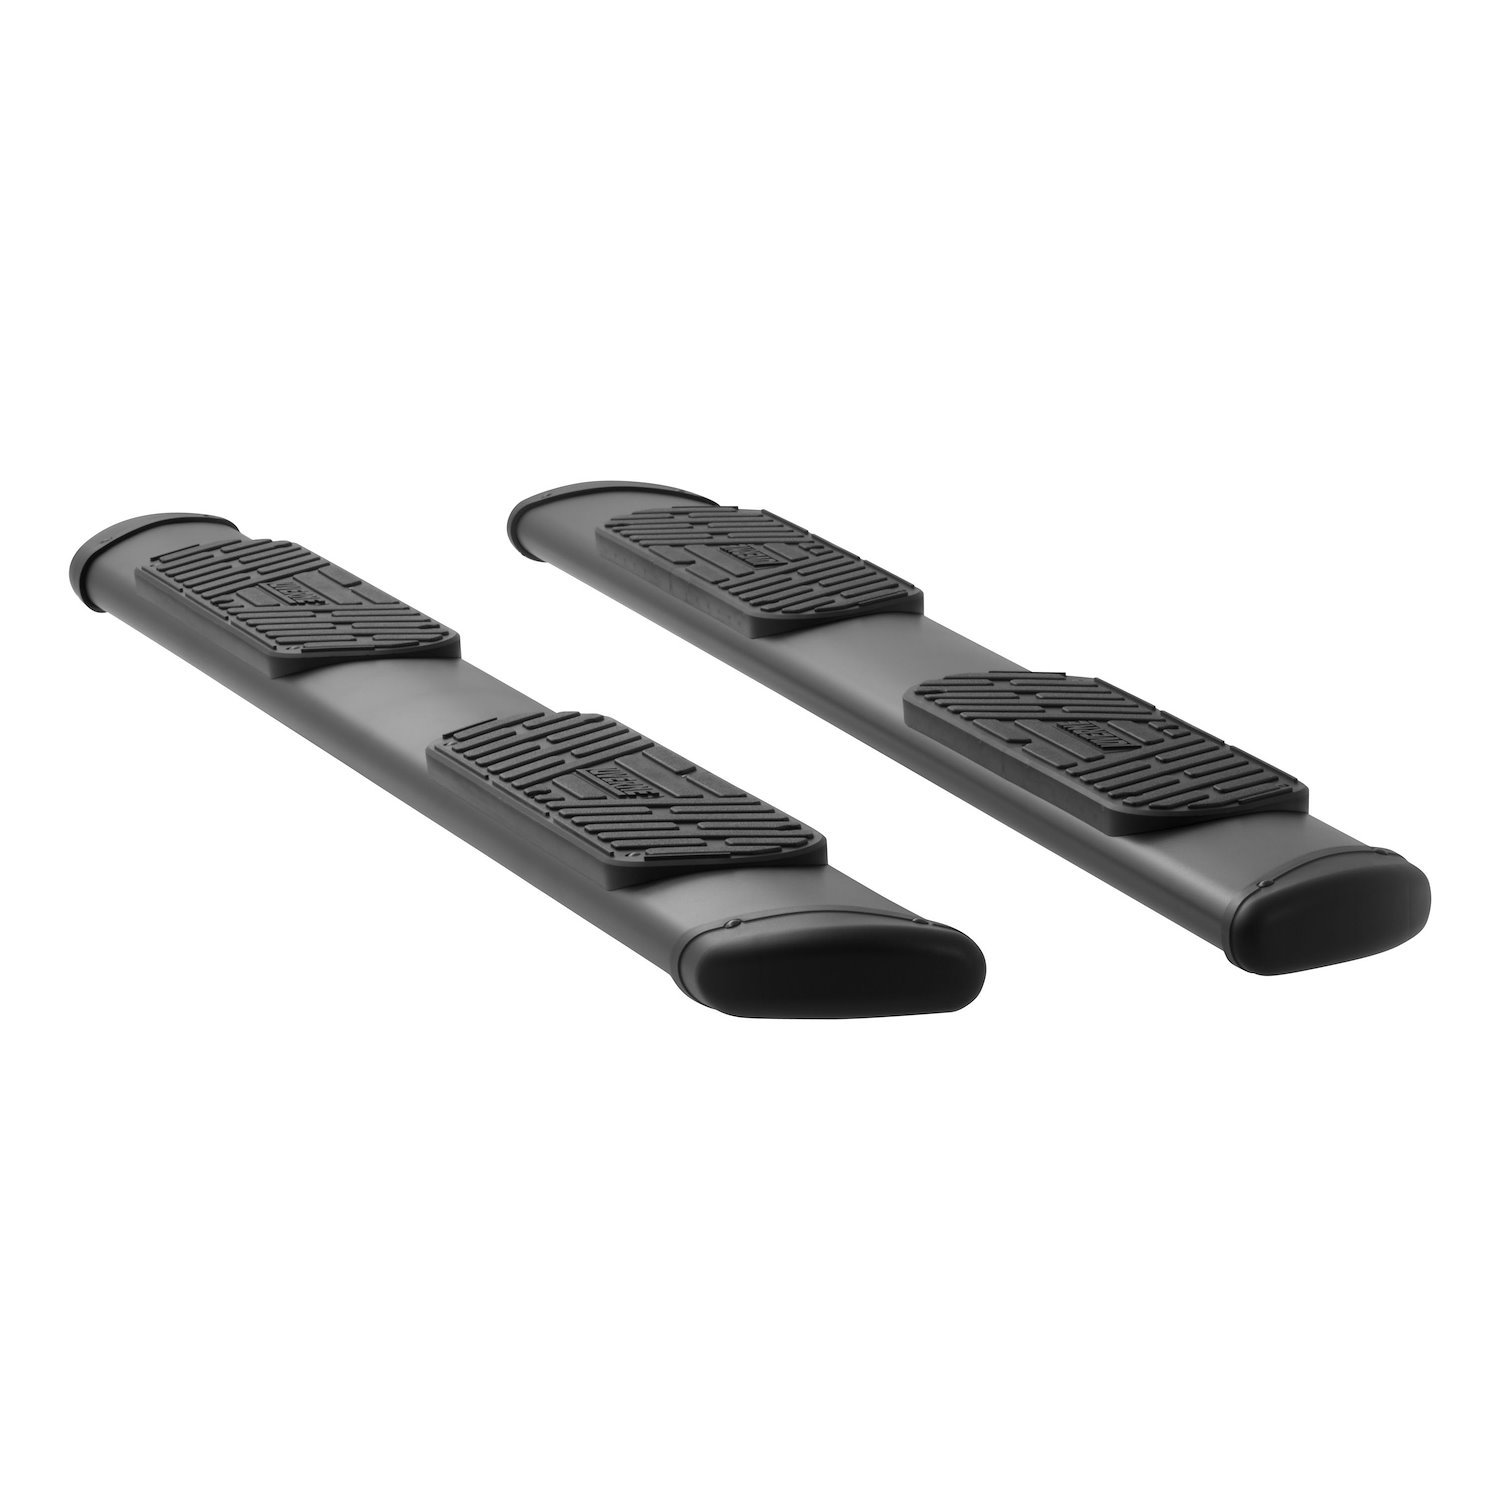 277088-401632 Regal 7 Black Stainless 88 in. Oval Side Steps Fits Select Dodge, Ram 1500 to 5500